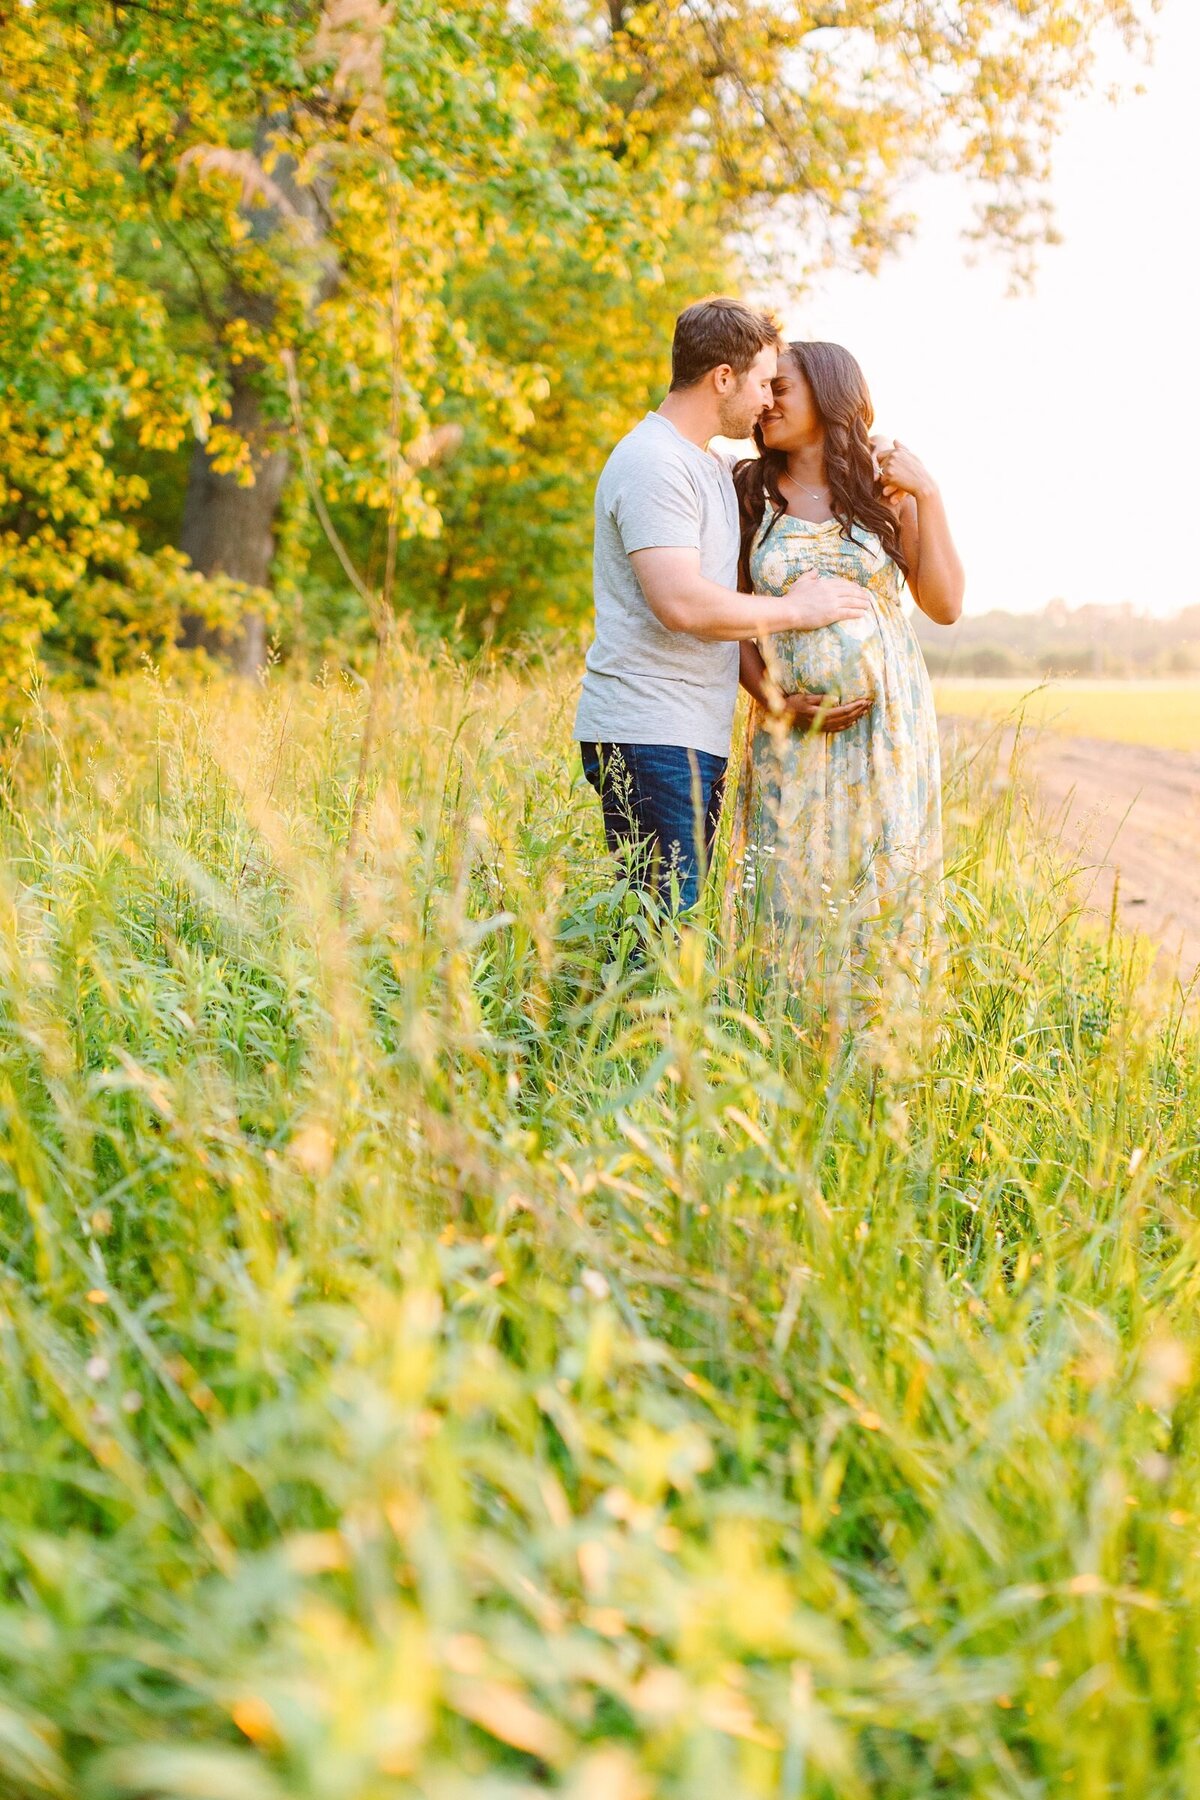 A-Dreamy-Rockport-Indiana-Maternity-Session-Bret-and-Brandie-Photography20